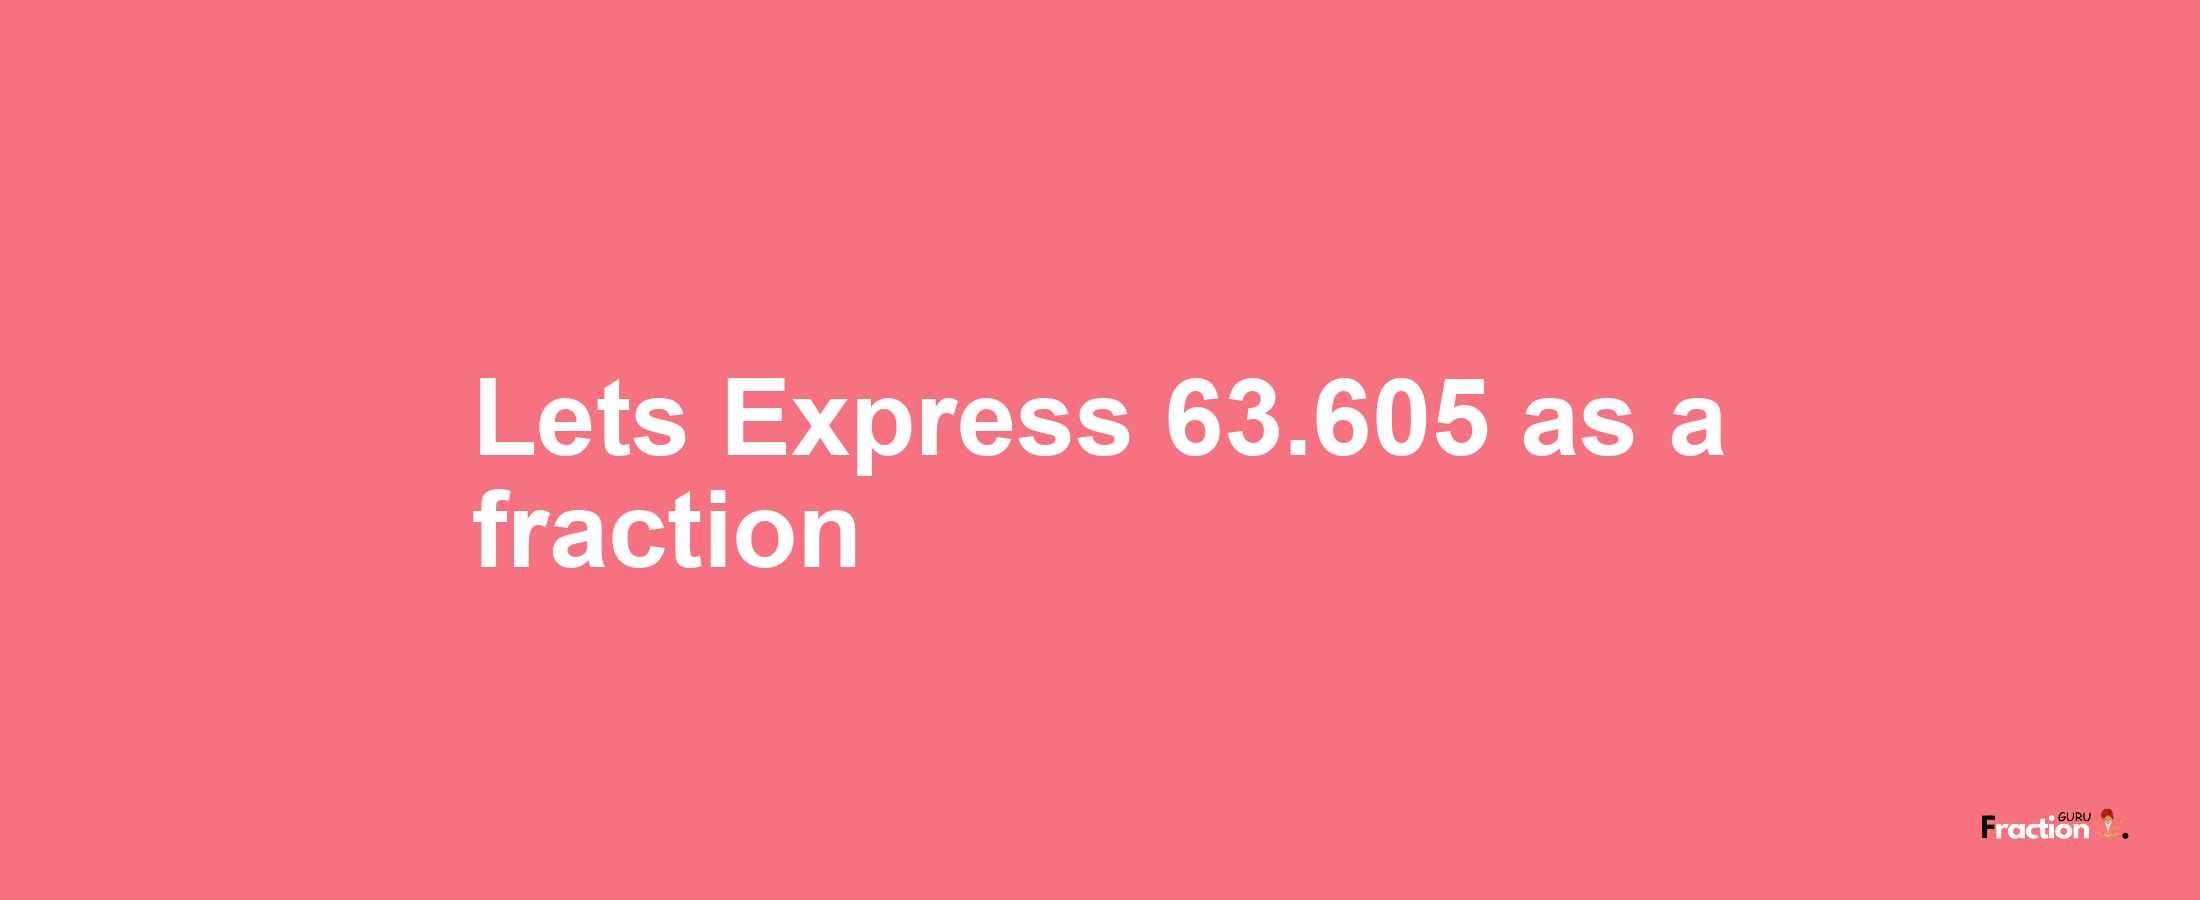 Lets Express 63.605 as afraction